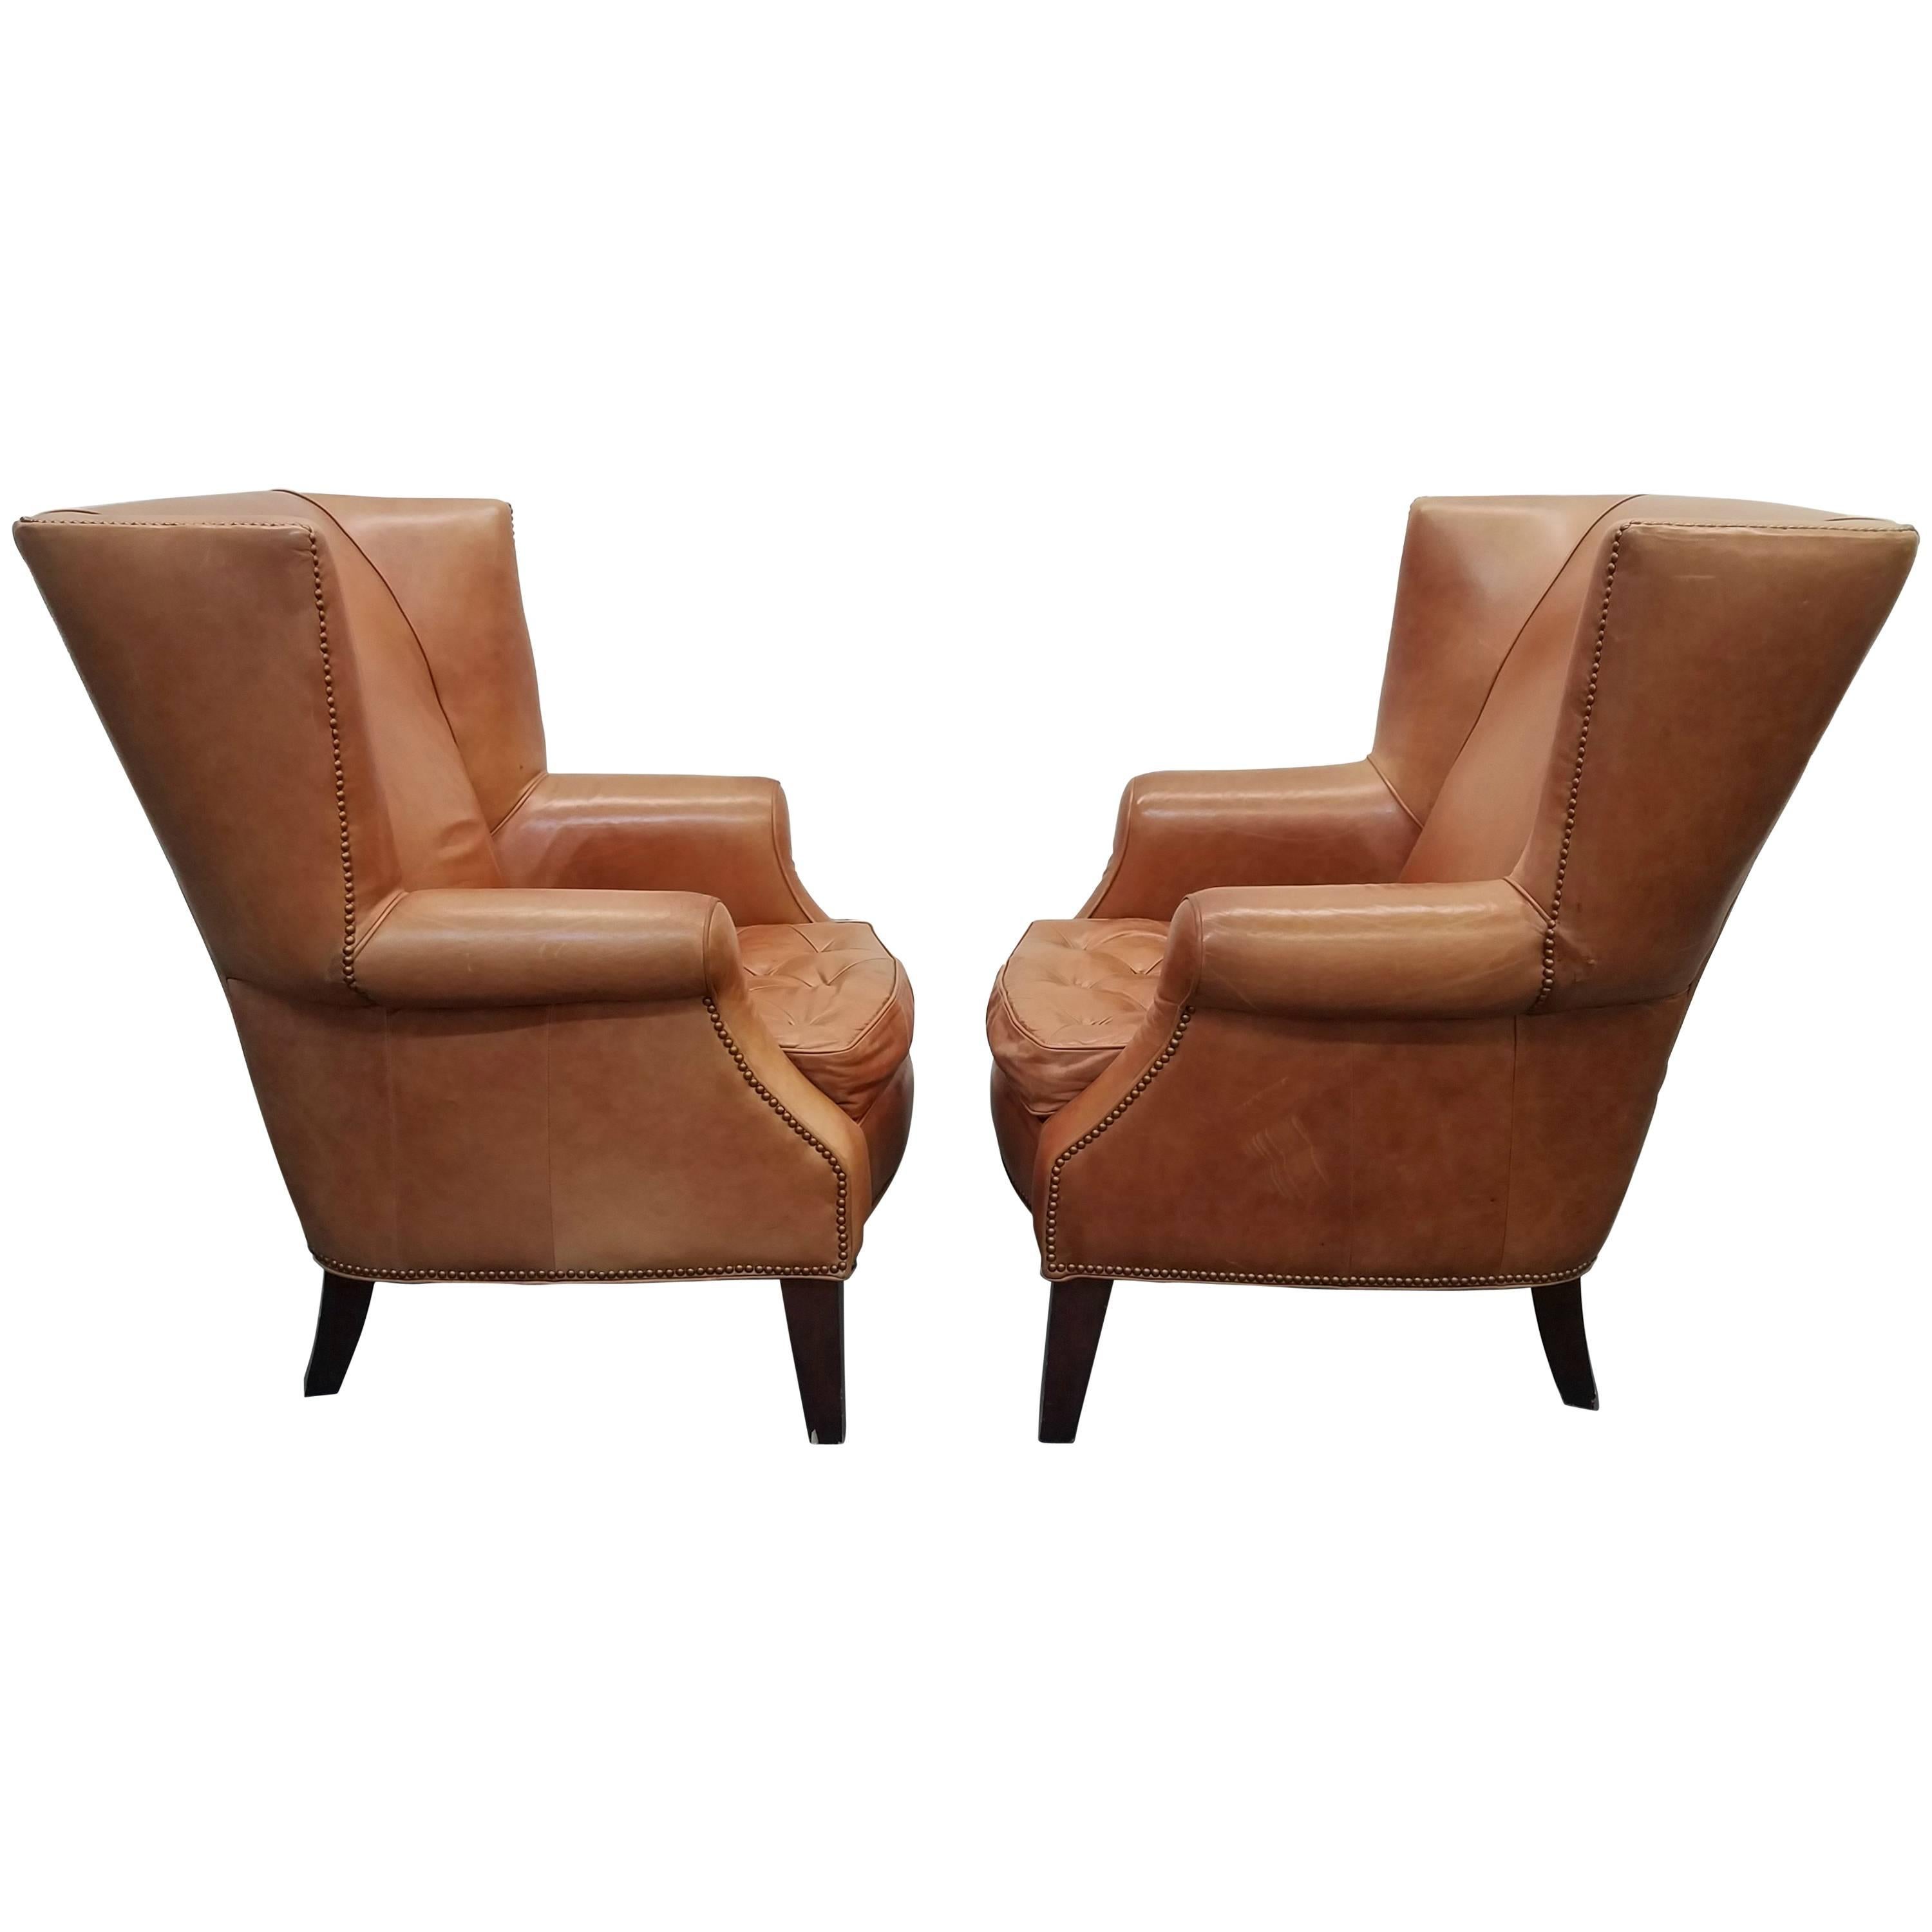 Pair of Oversized Vintage Leather Wingback Chairs